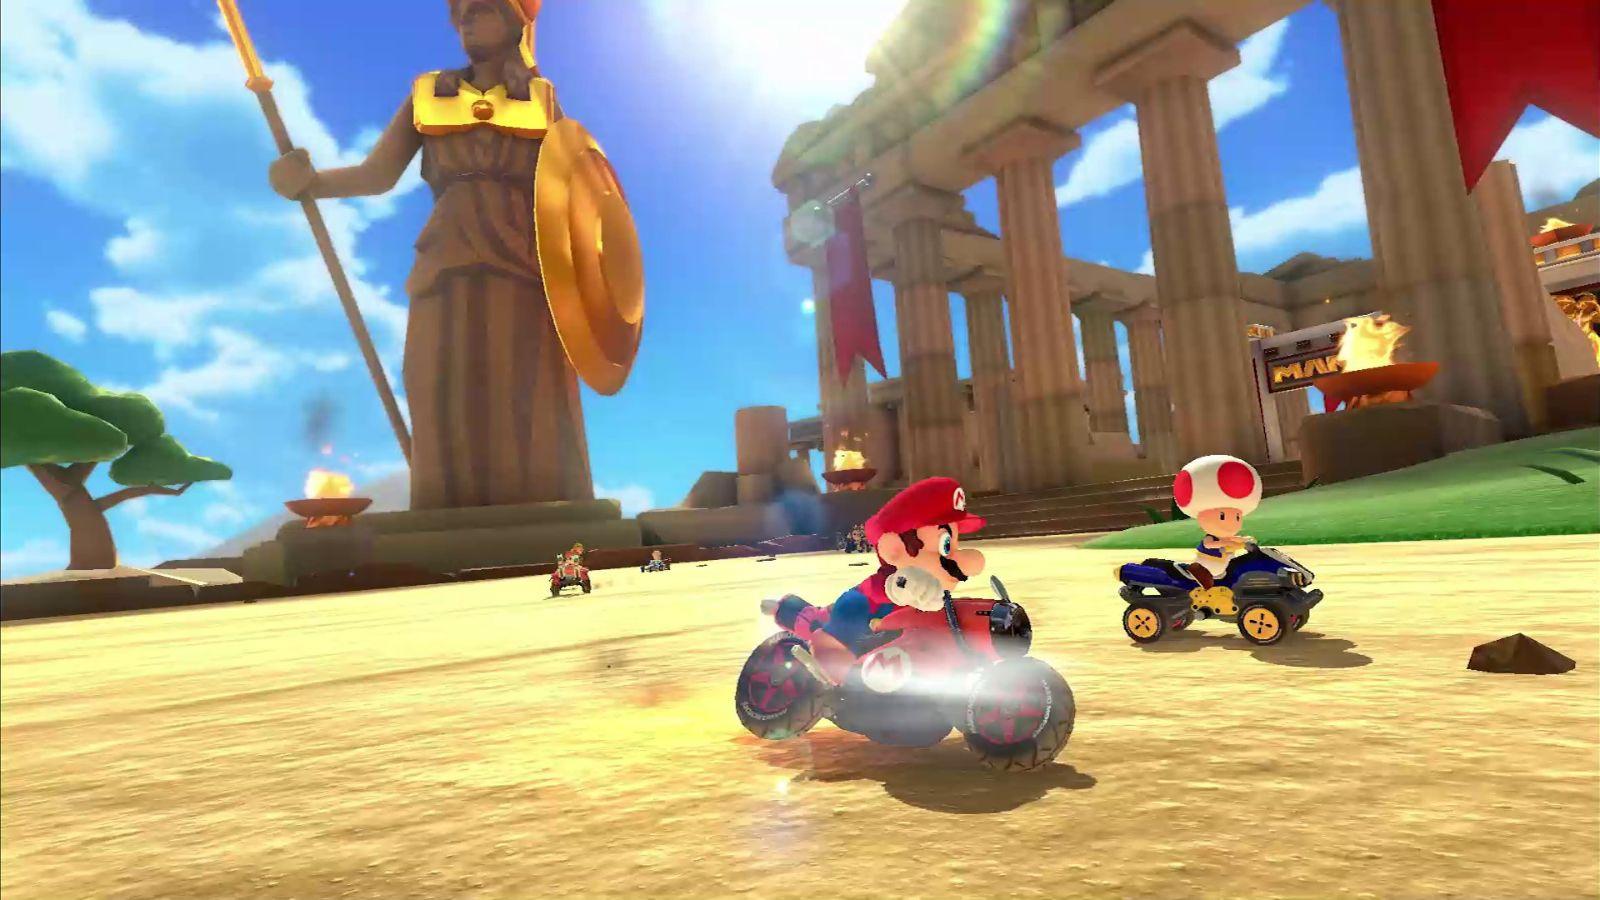 Player finds game-changing shortcut in Mario Kart 8